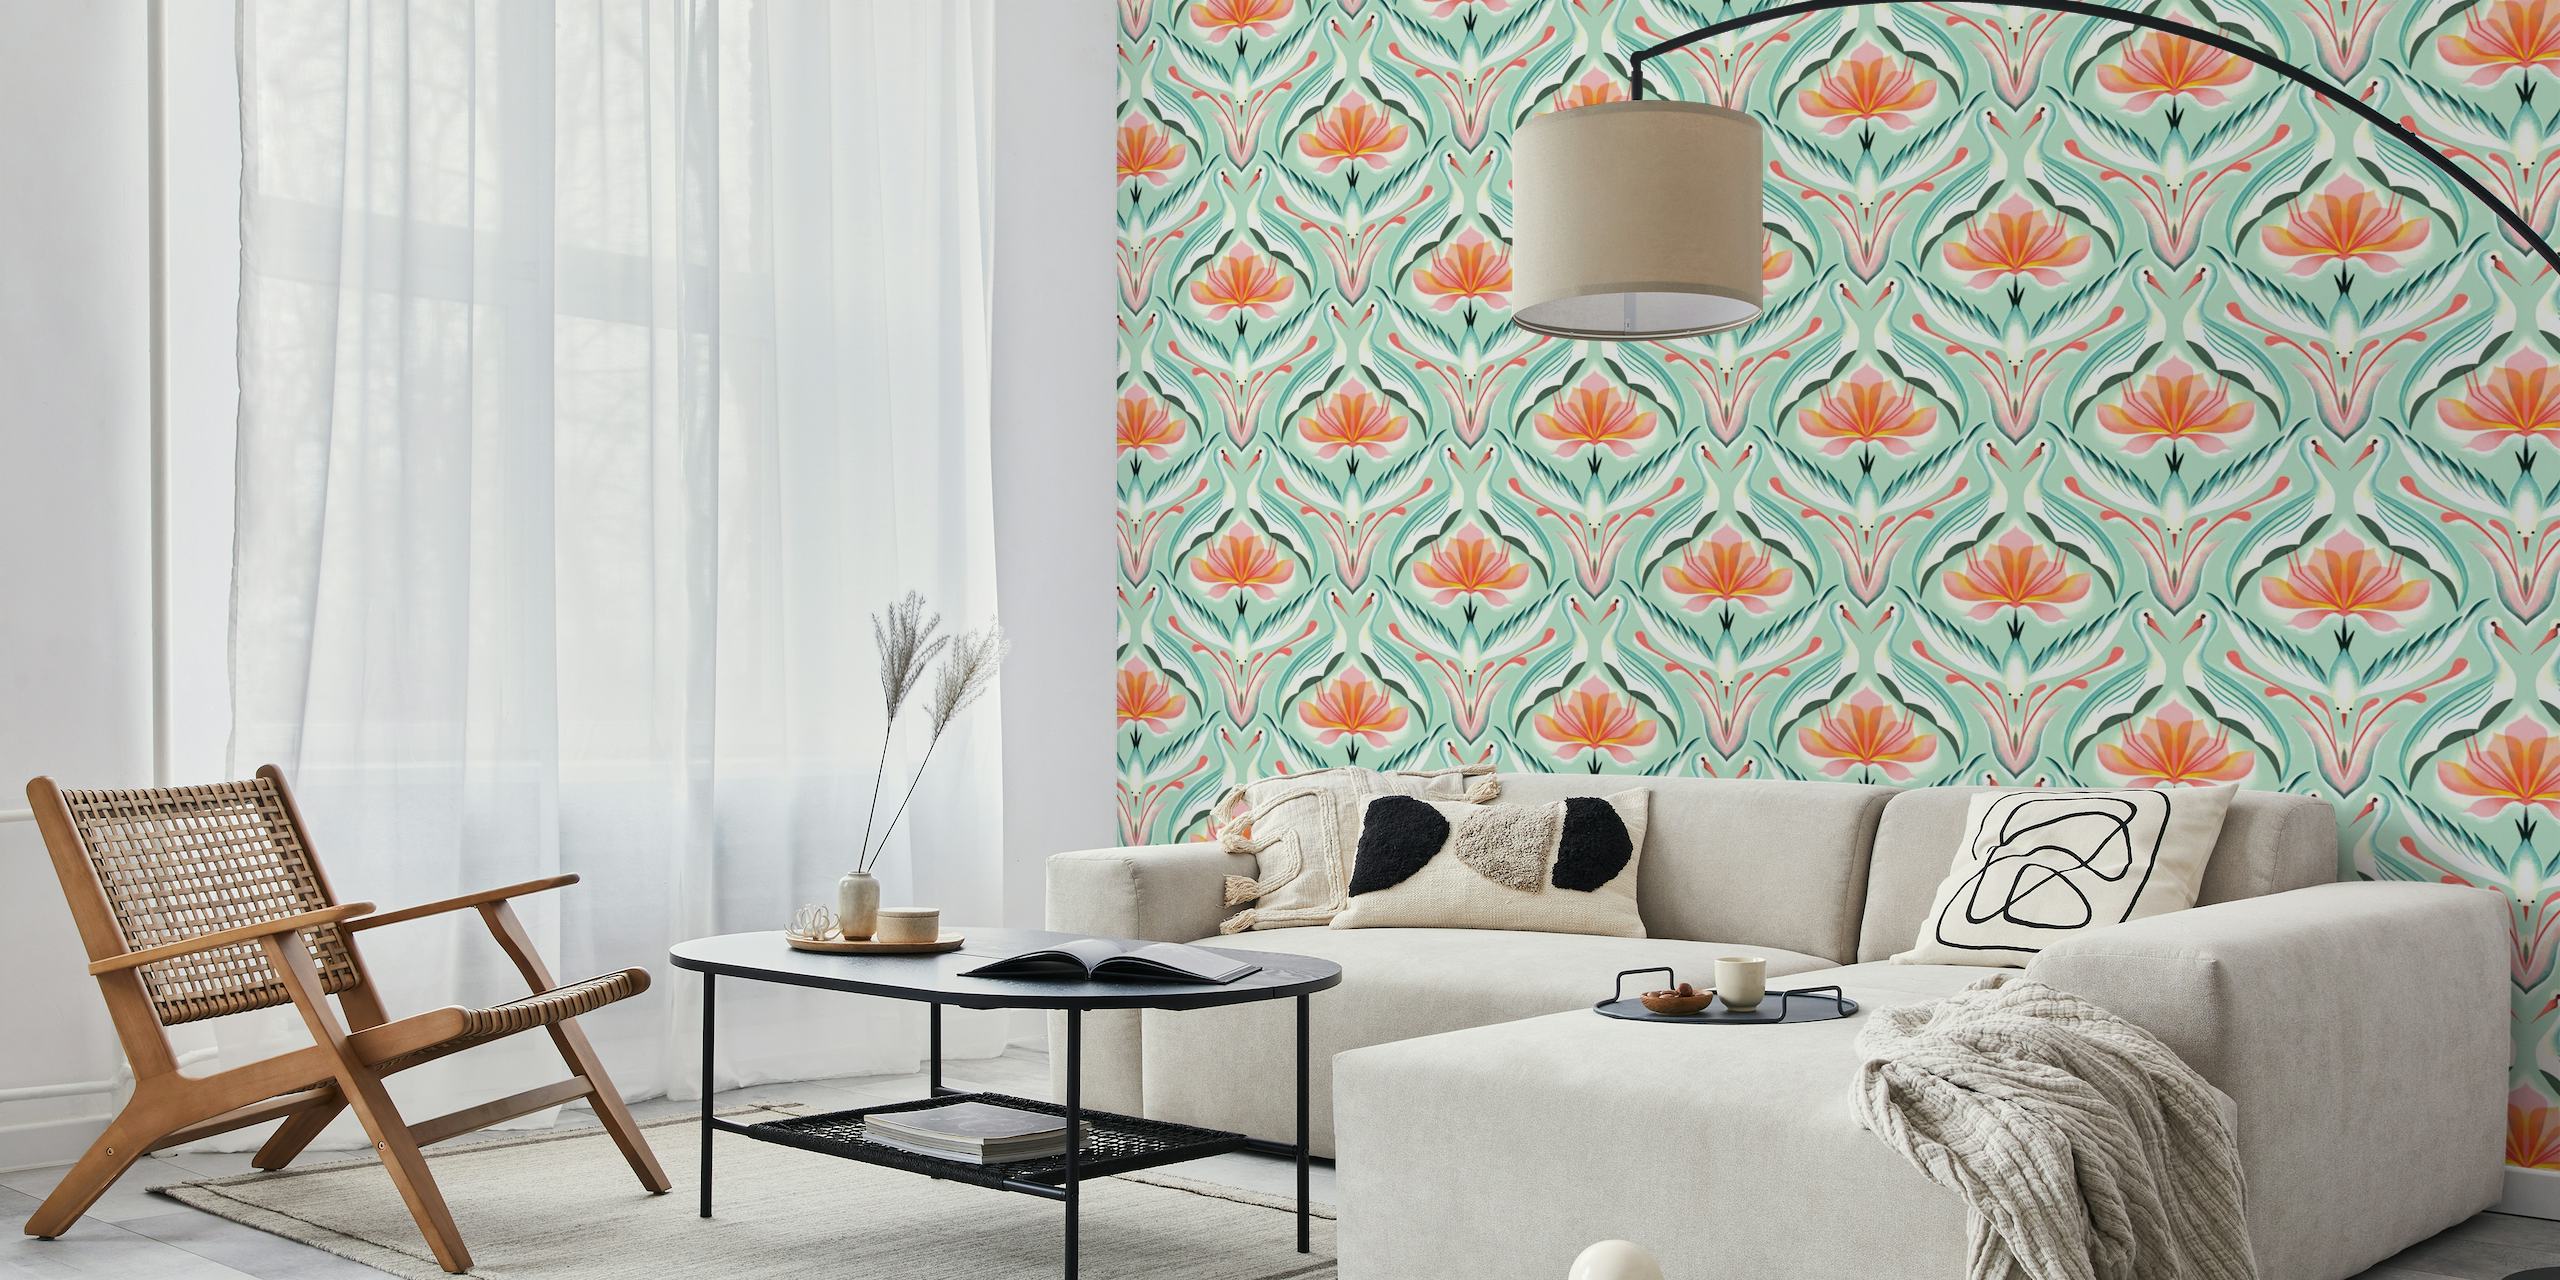 Wall mural of lotus flowers and elegant cranes in a symmetrical design with a soft color palette